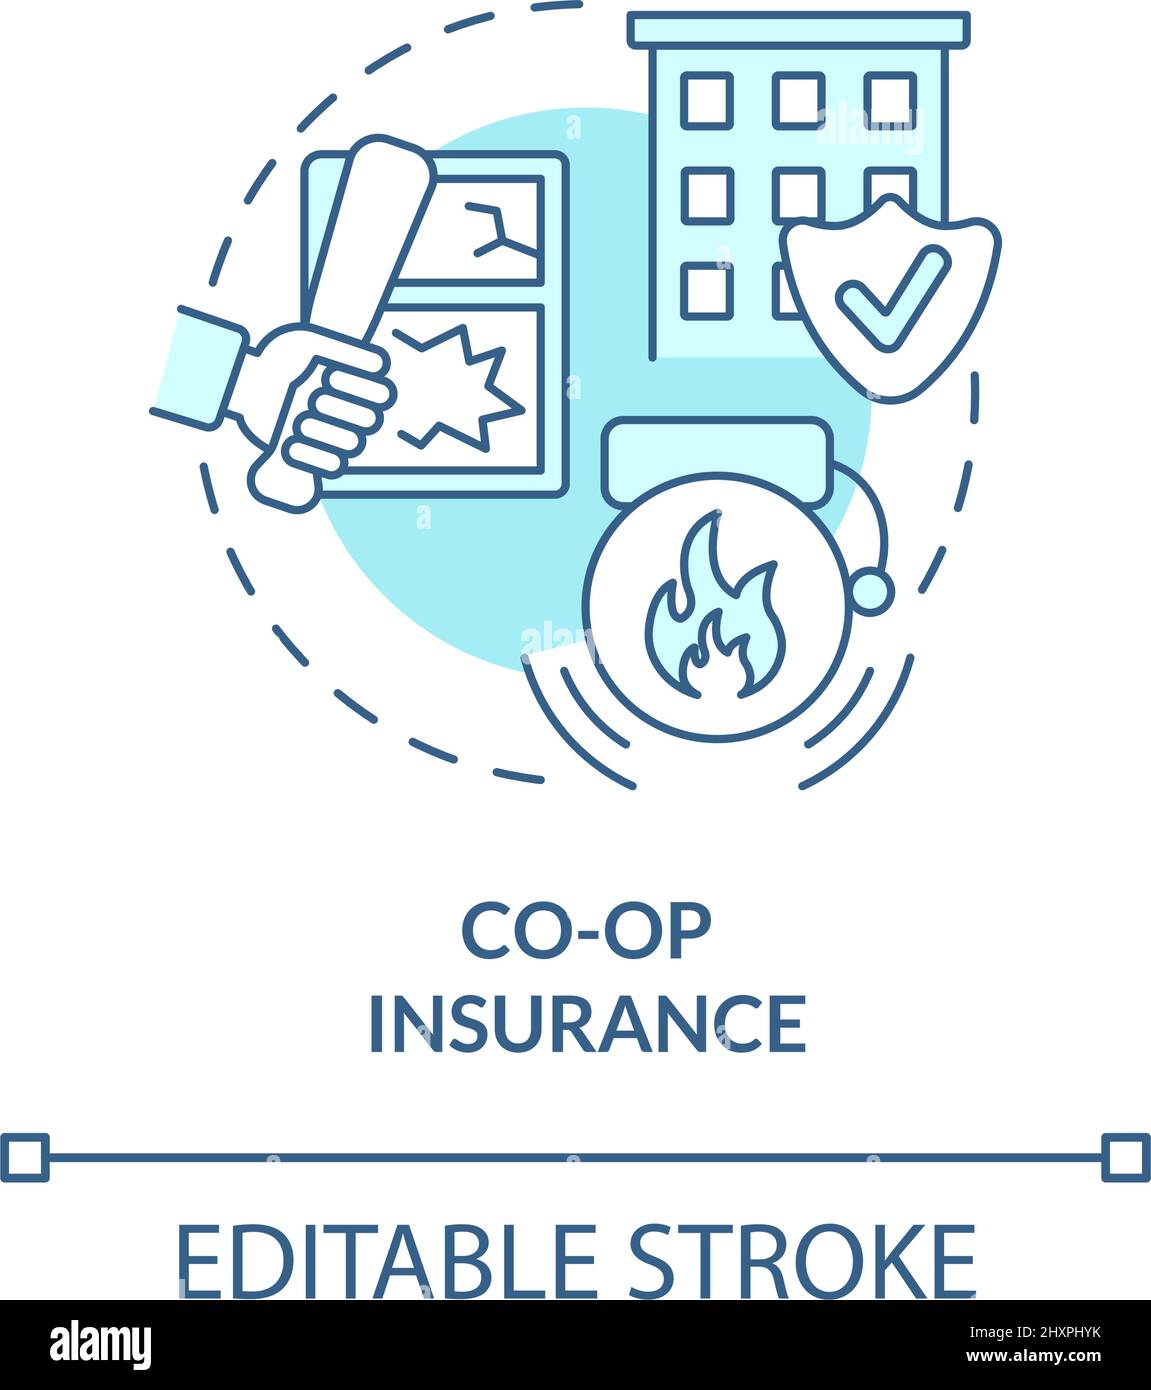 Co-Op insurance turquoise concept icon Stock Vector